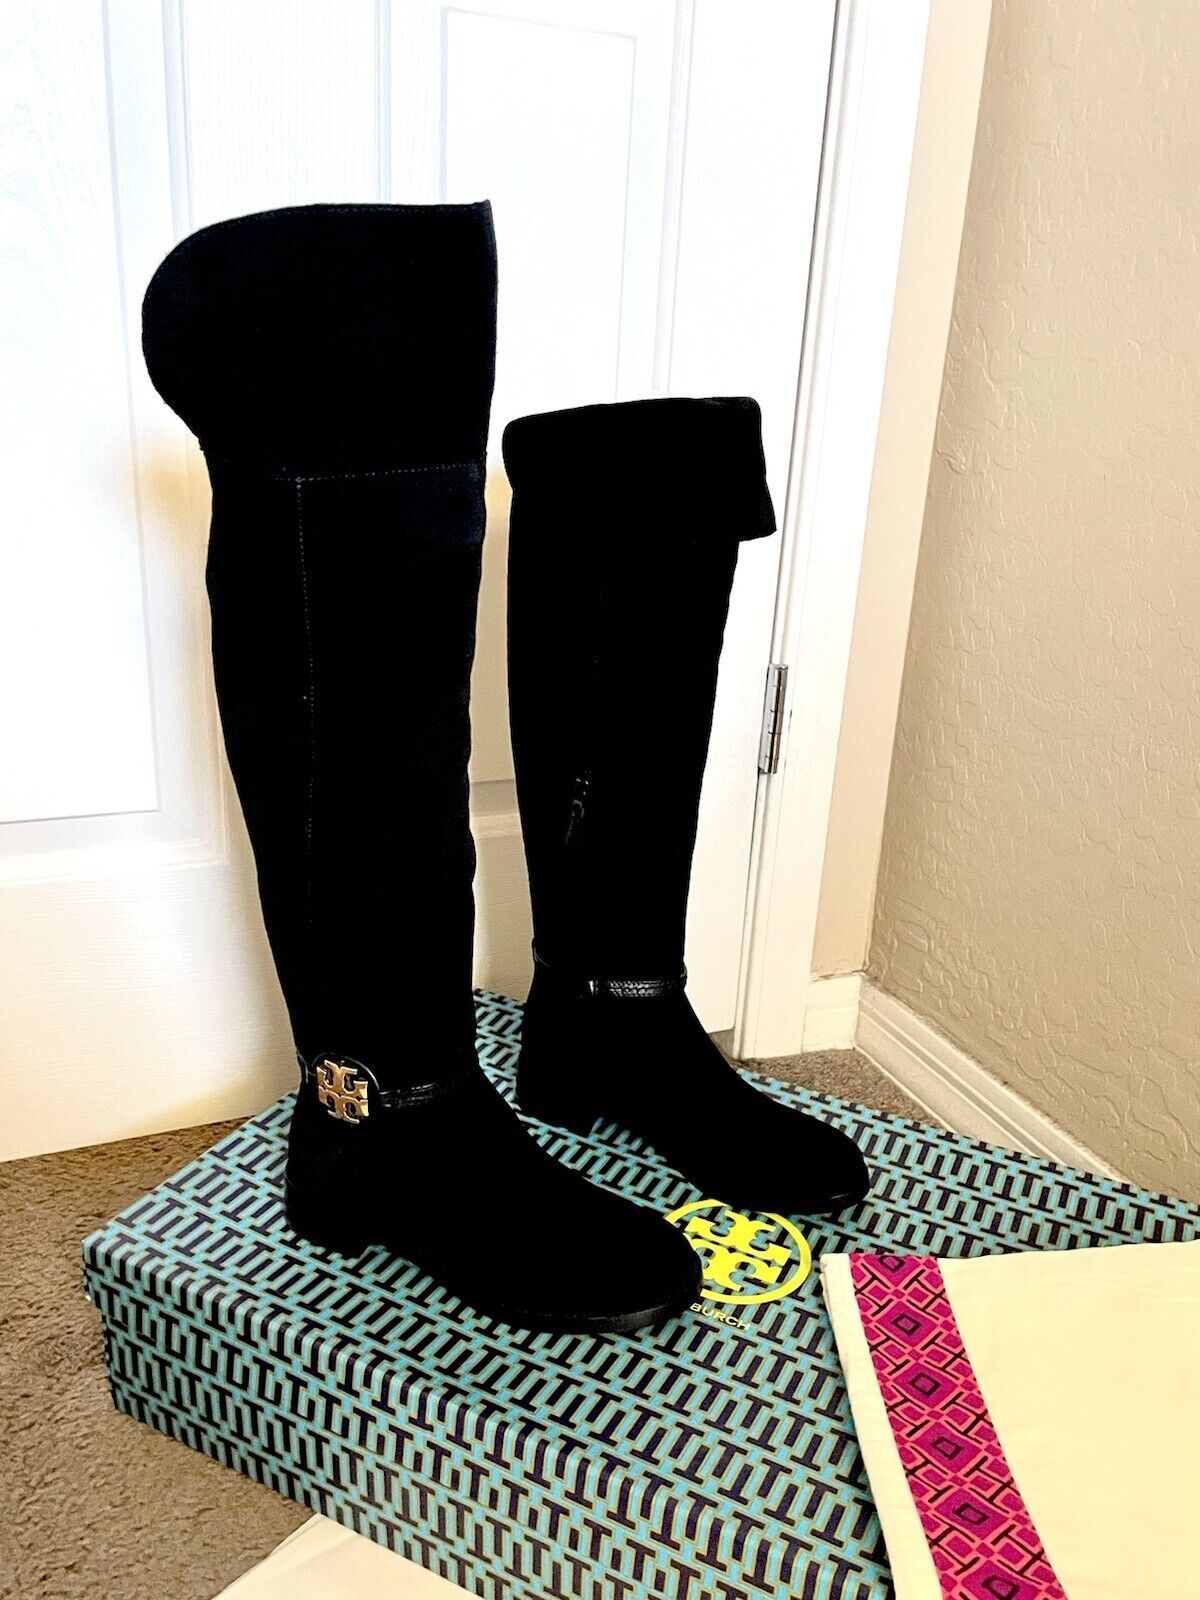 TORY BURCH MILLER BLACK SUEDE OVER THE KNEE BOOTS  & Dust Bag NEW  192485282191 | eBay